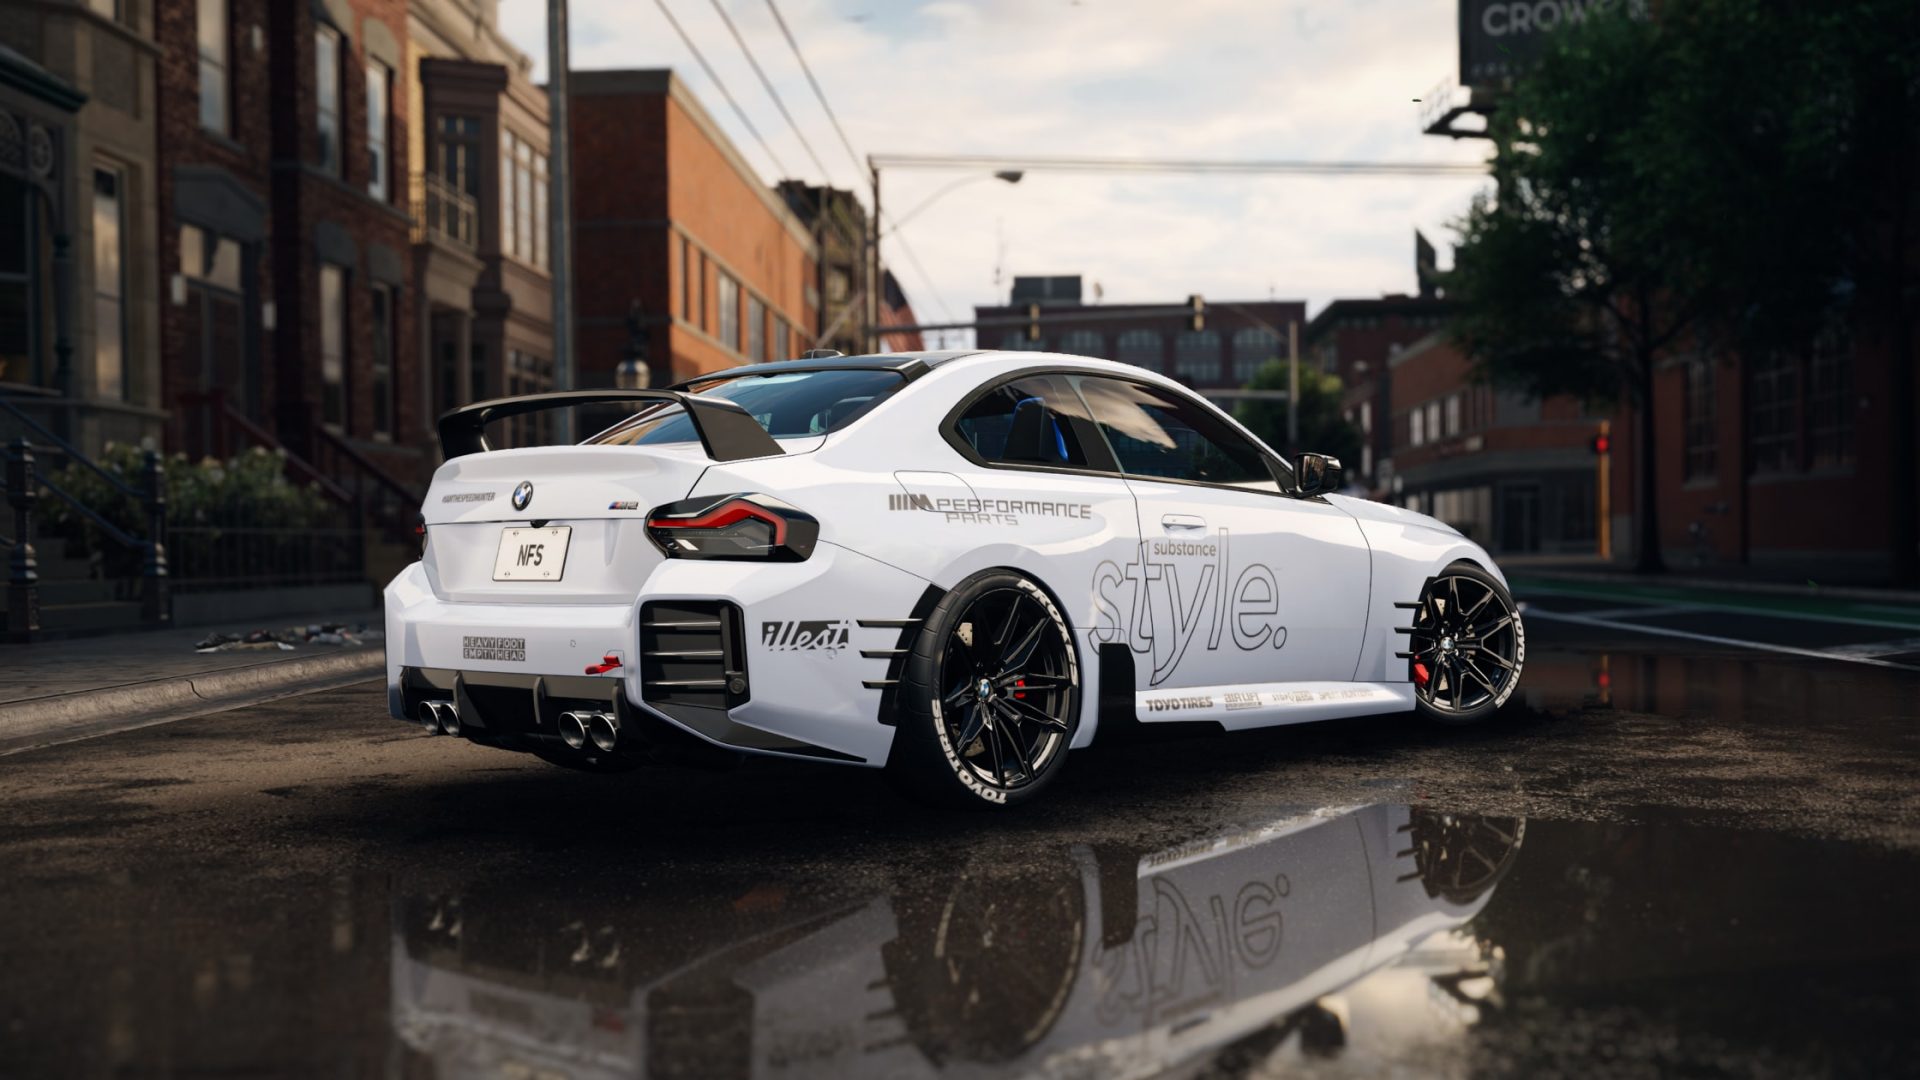 Gaming: Need for Speed Unbound arrives this December